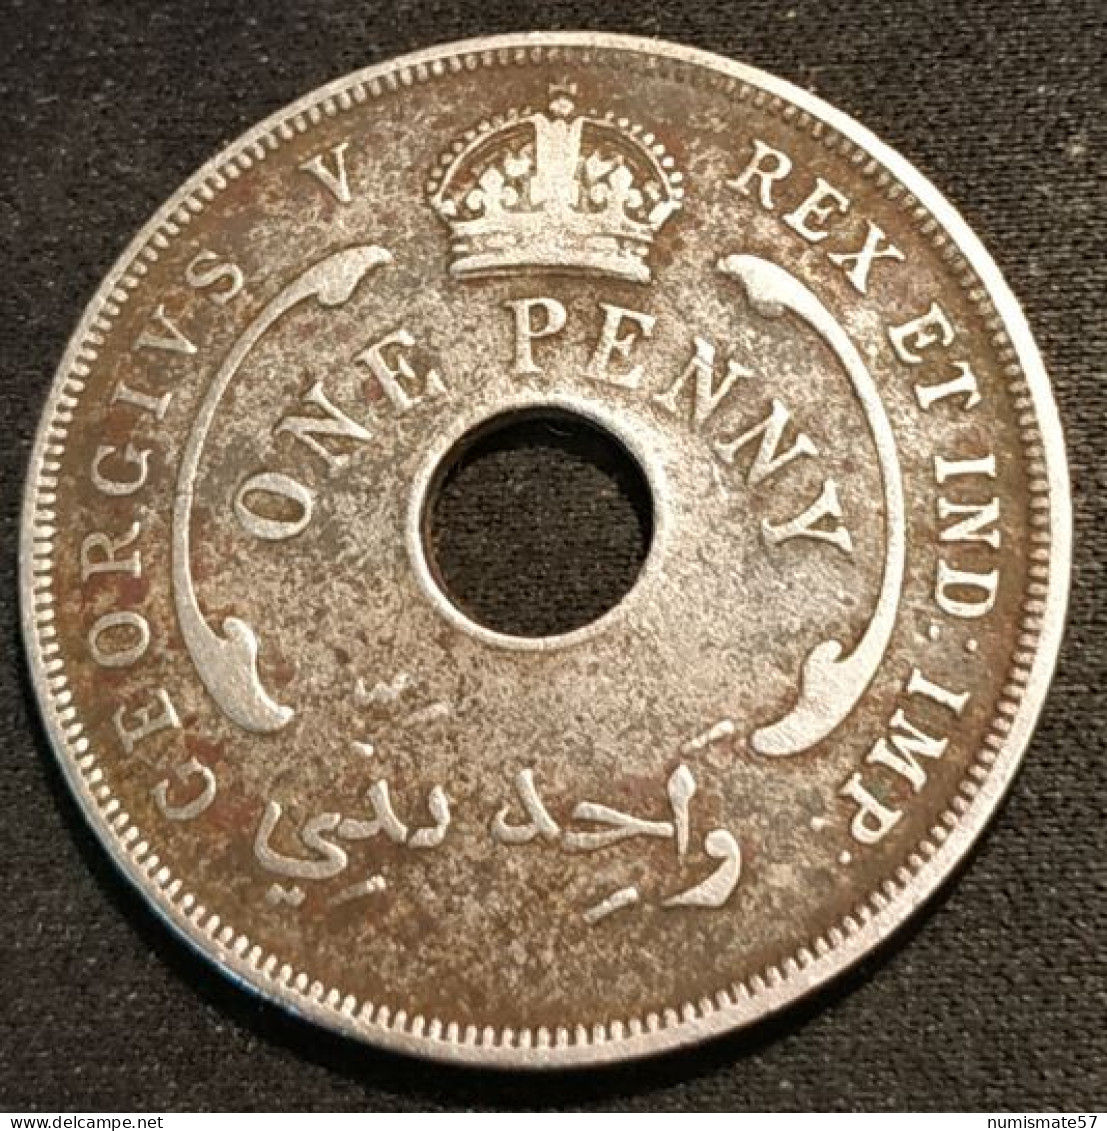 BRITISH WEST AFRICA - ONE PENNY 1928 - George V - KM 9 - ( Afrique Occidentale Britannique ) - Colonie